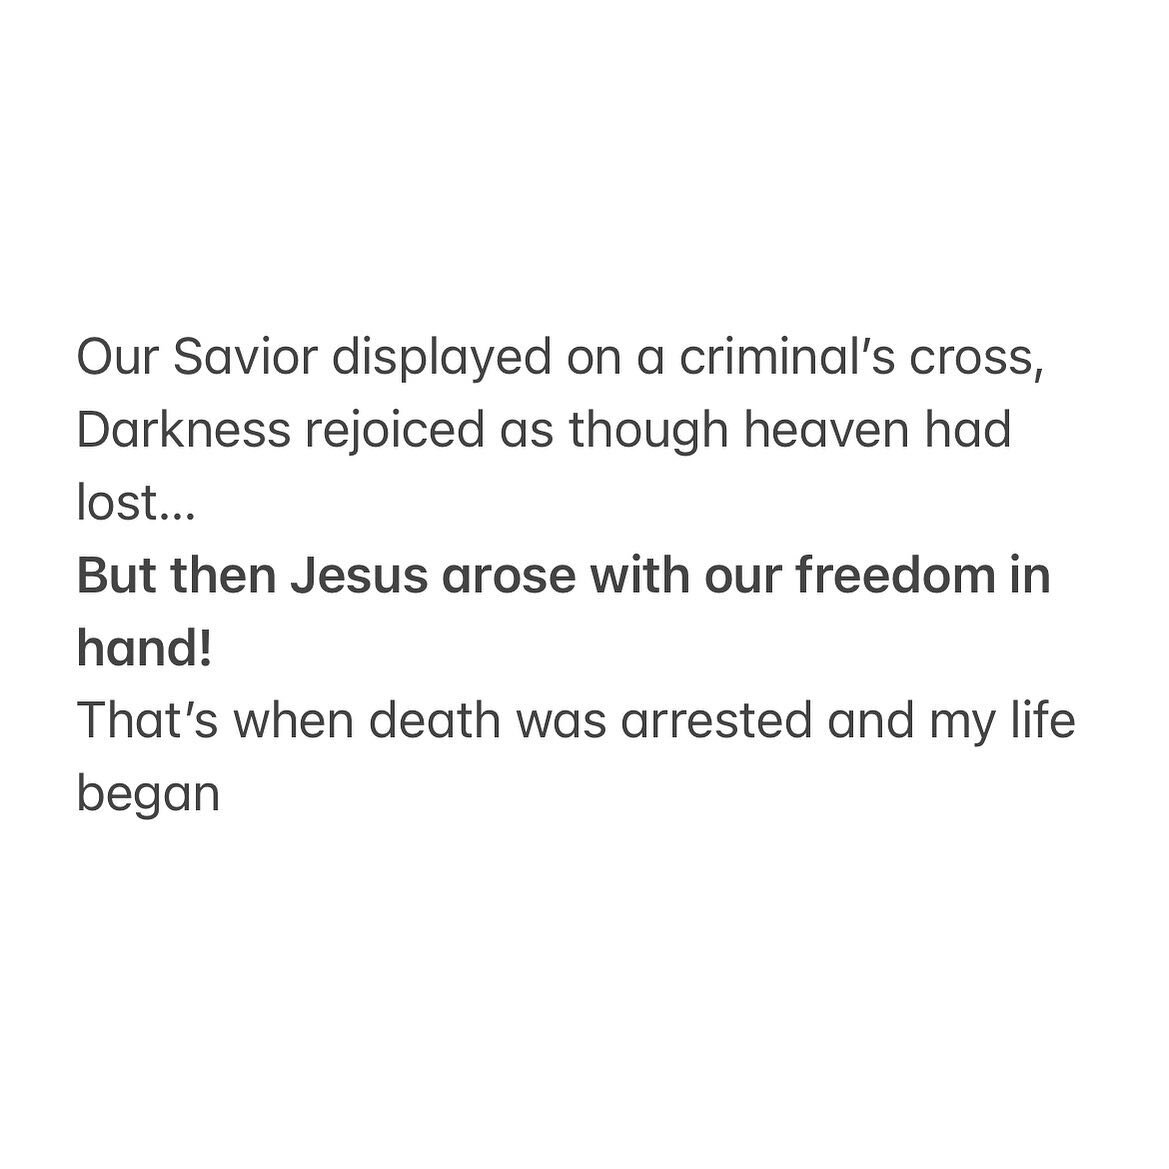 It&rsquo;s not just that He died for us. He resurrected. He came back to life so that we could have life in Him. Forgiven and made new. That&rsquo;s the Good News!

Happy Easter, friends. He is risen 🙌🏼